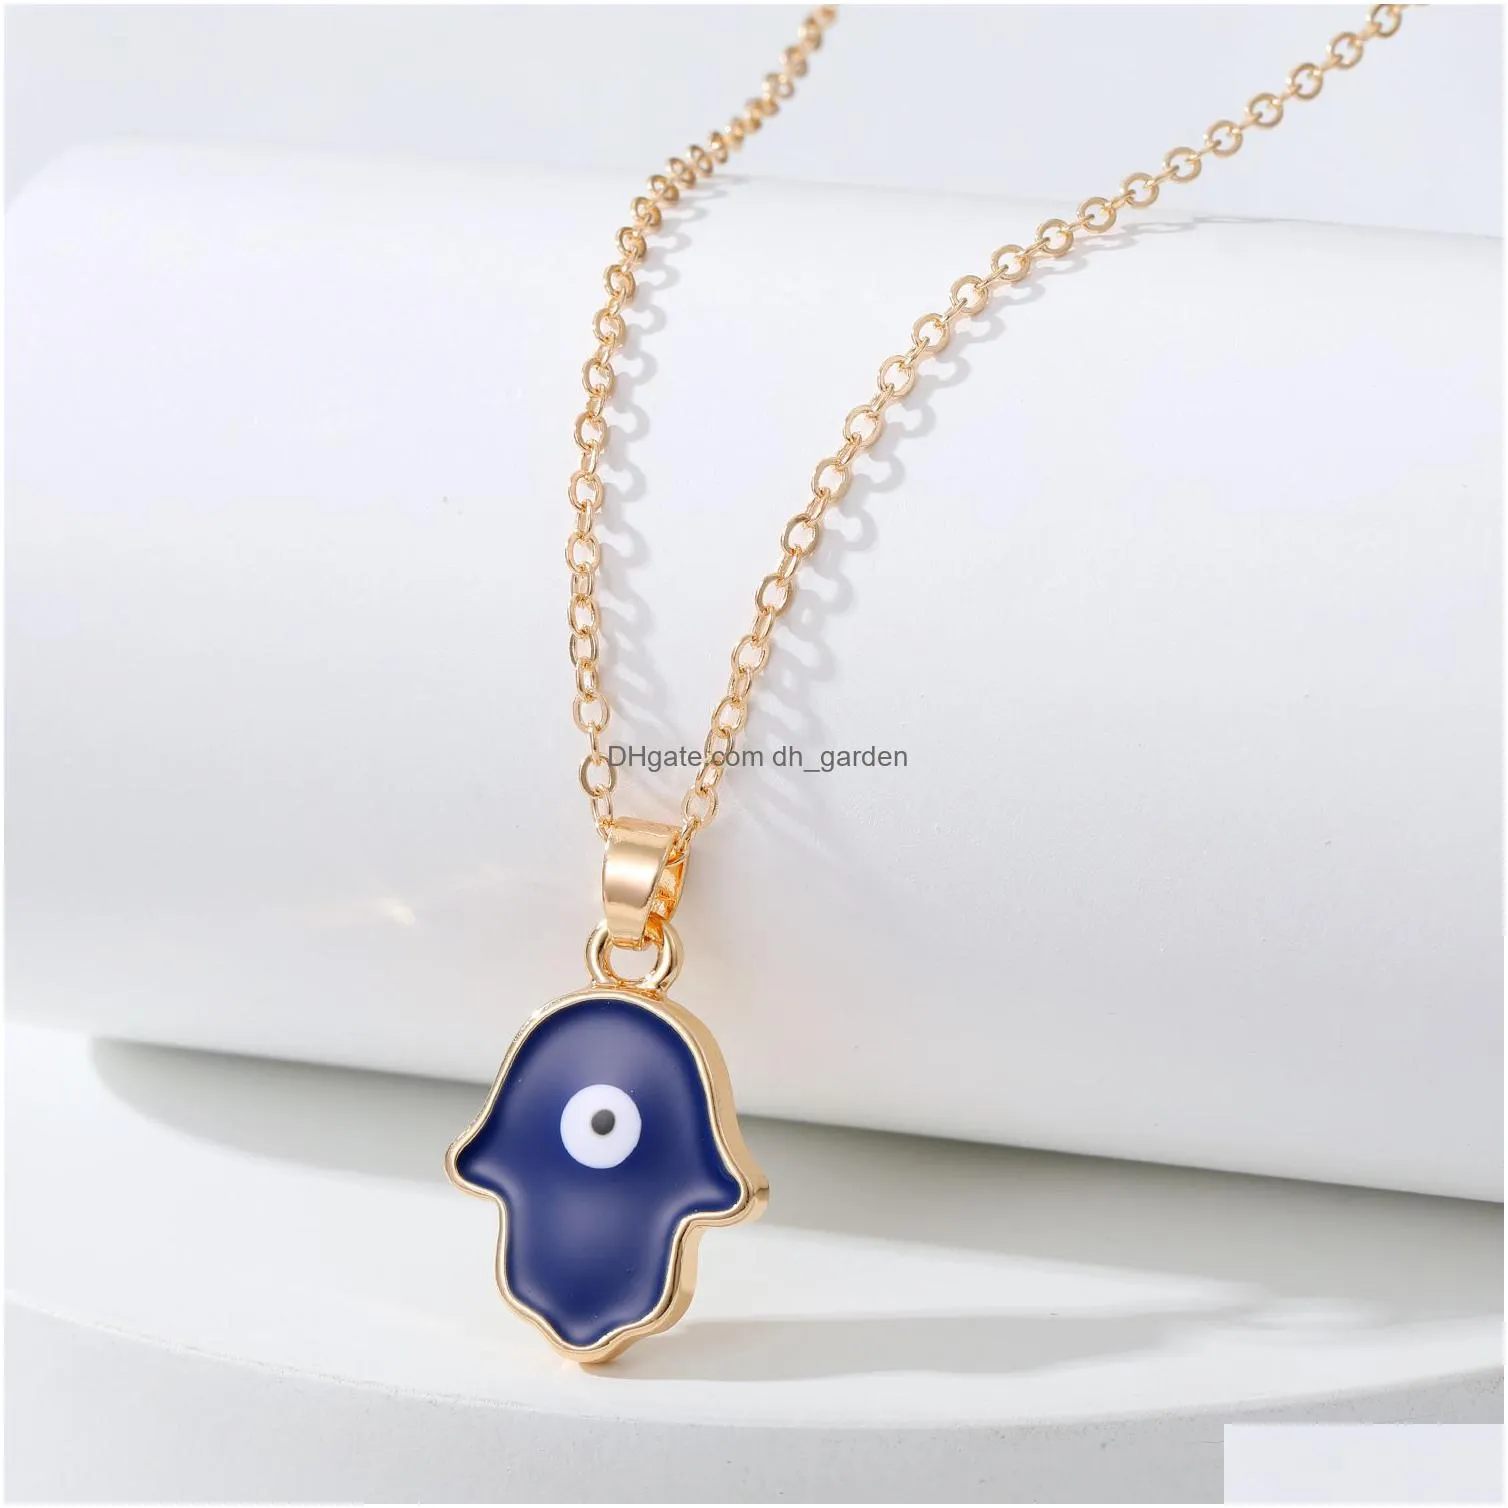 colorful turkish blue evil eye palm hand pendant necklace for women new trendy lucky eye clavicle chain choker wedding jewelry